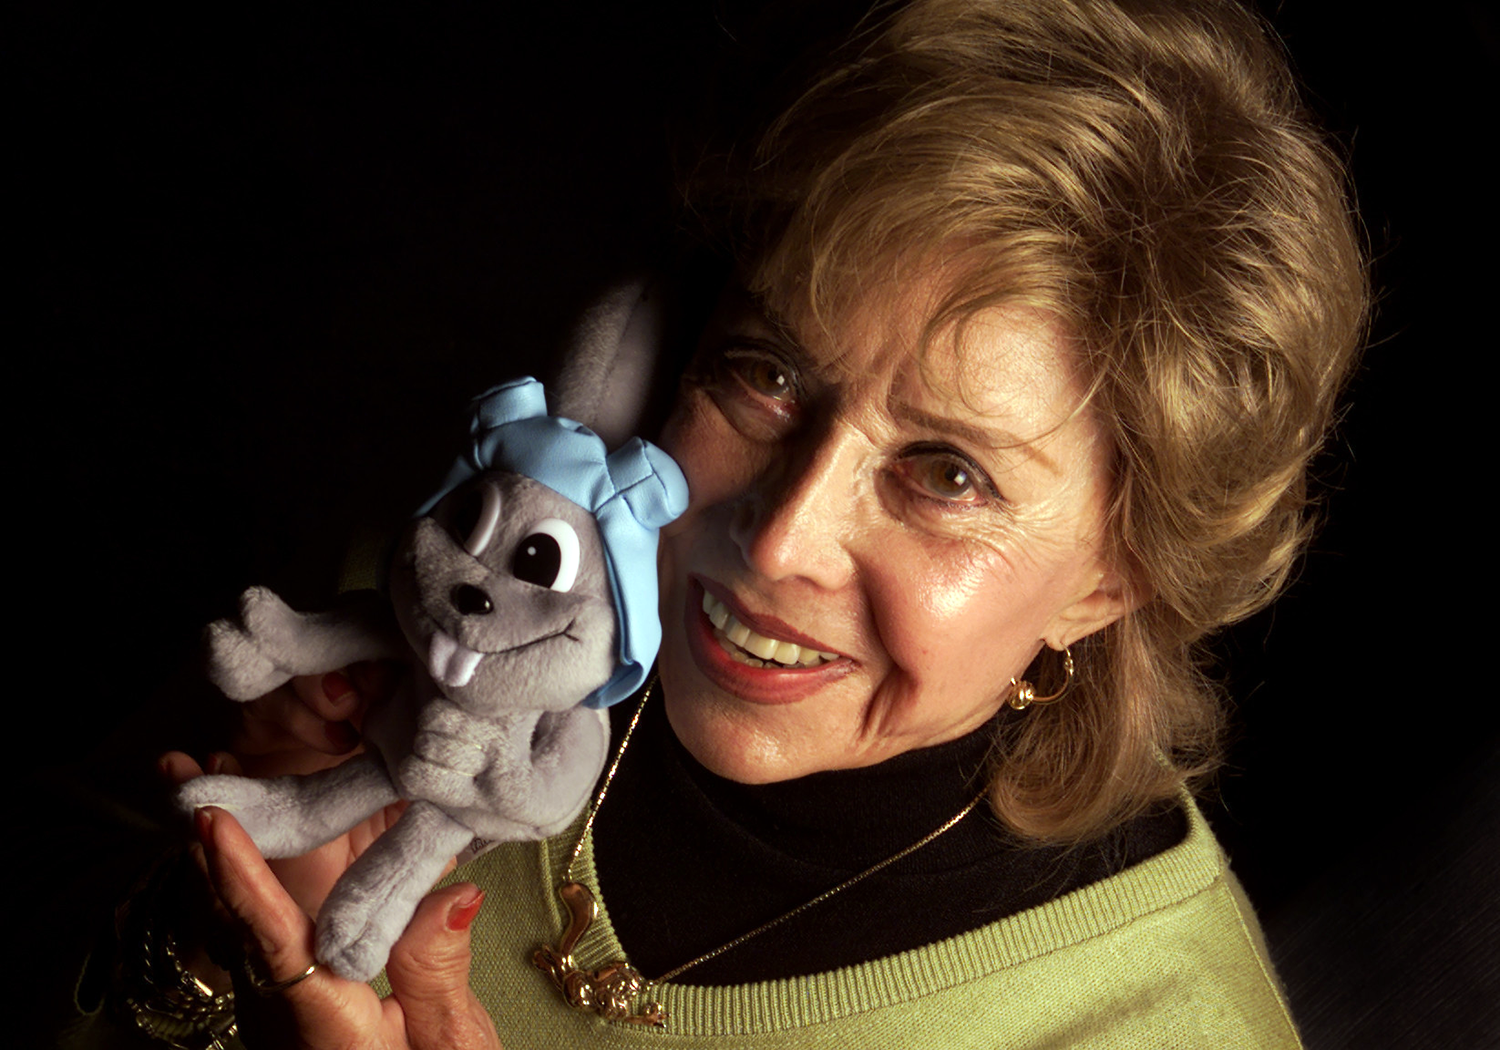 June Foray, seen in 2000, when she reprised her legendary voice role of Rocky the Flying Squirrel for the new "Rocky and Bullwinkle" film.